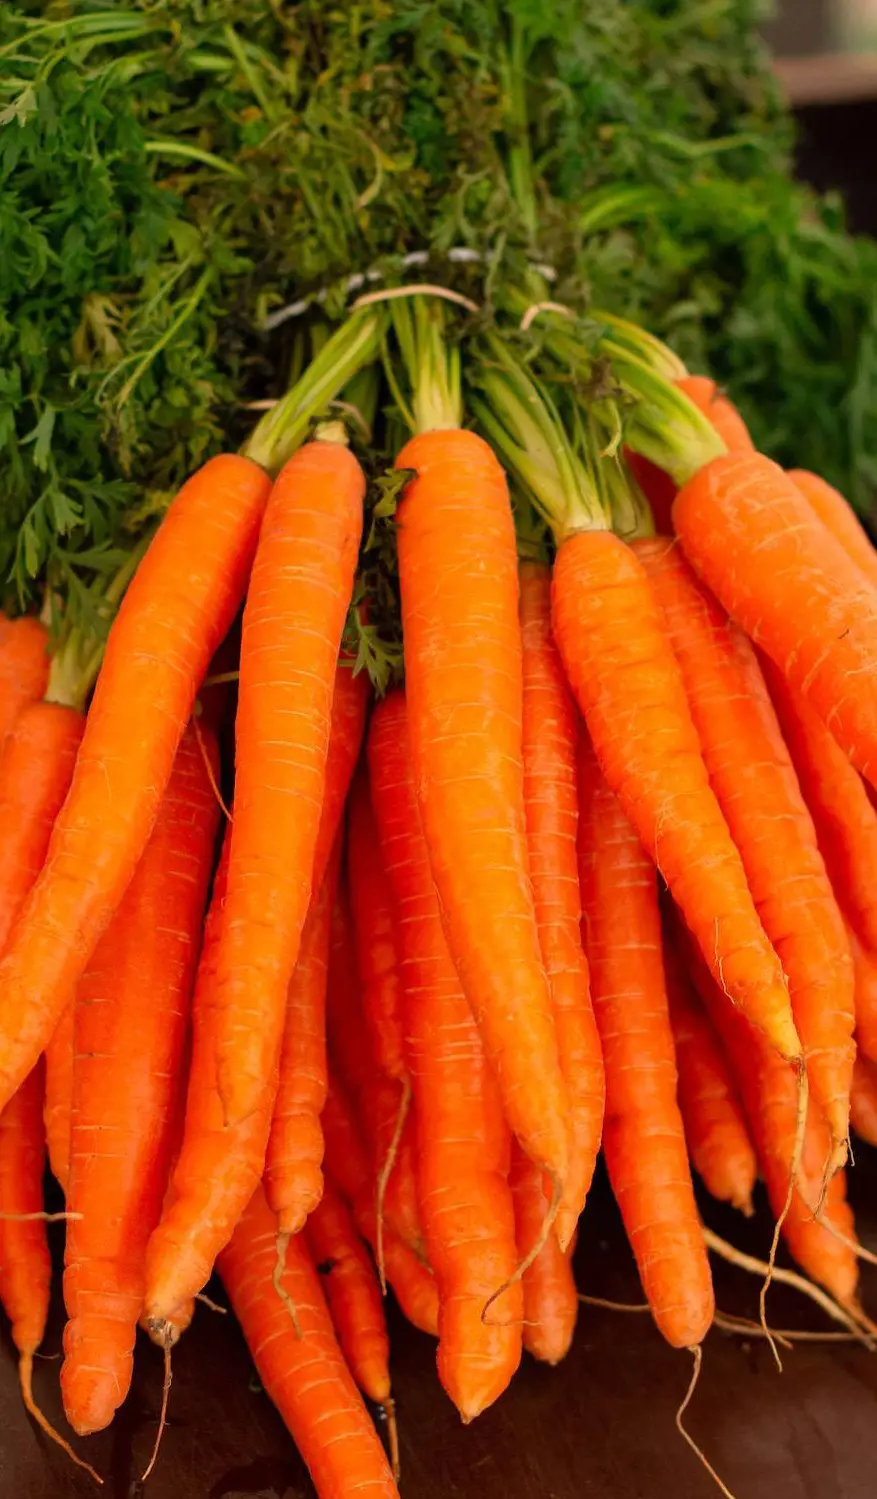 Raw vegetables like carrots present a choking risk, so cook the vegetable before serving kids 